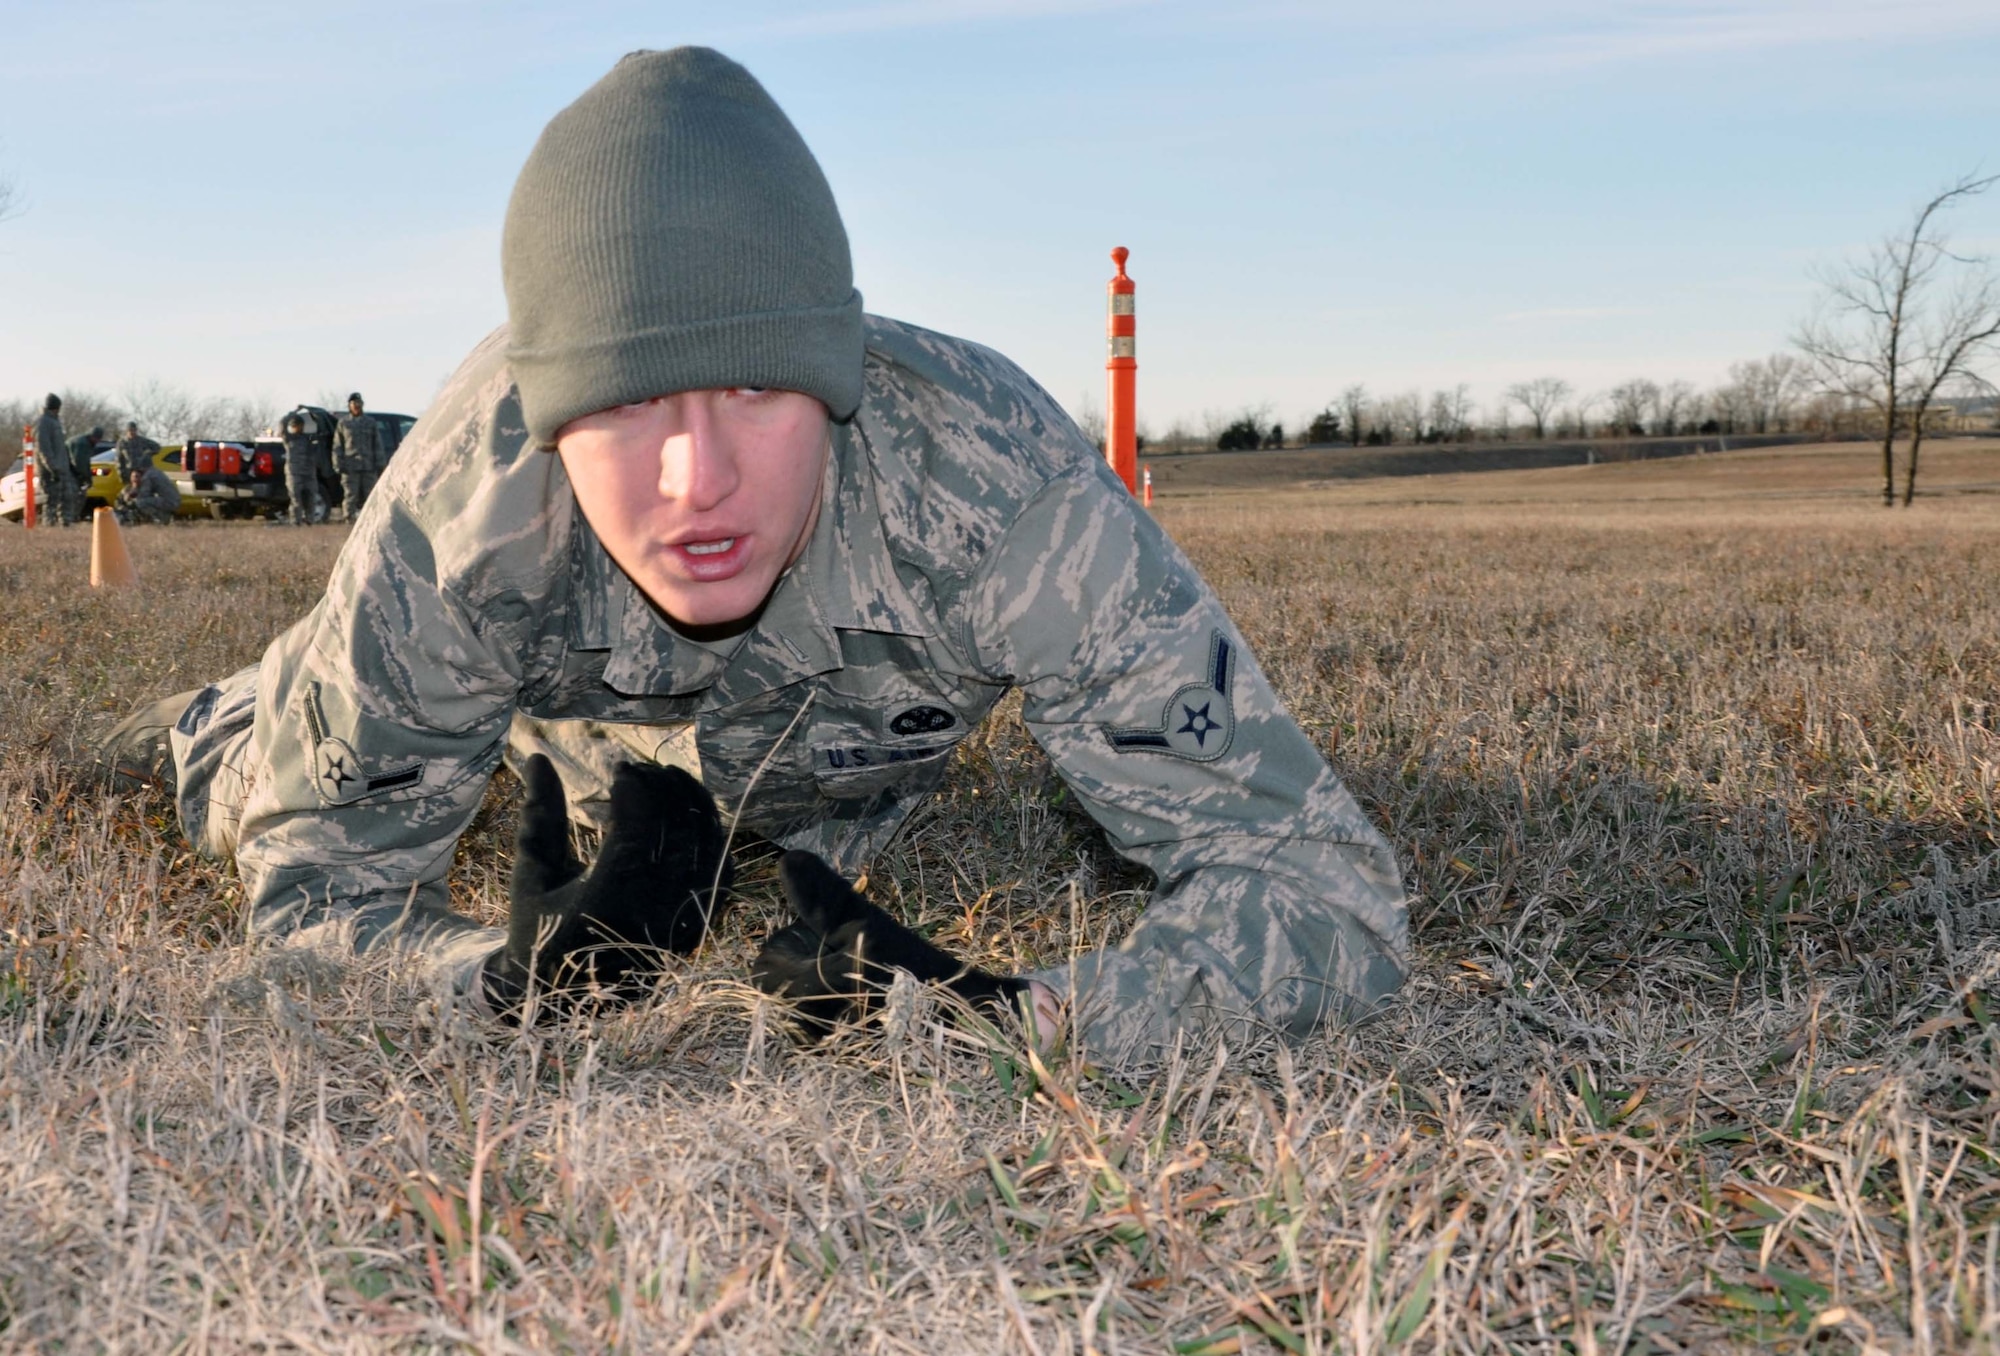 Airmen Ryan Flock, 931st Security Forces Squadron, performs a high-crawl while maneuvering through a combat fitness test course at McConnell Air Force Base, Kan., Jan. 7, 2012.  The combat fitness test was part of a two-day combat training regimen conducted by the squadron during the January Unit Training Assembly.  (U.S. Air Force photo by 1st Lt. Zach Anderson) 